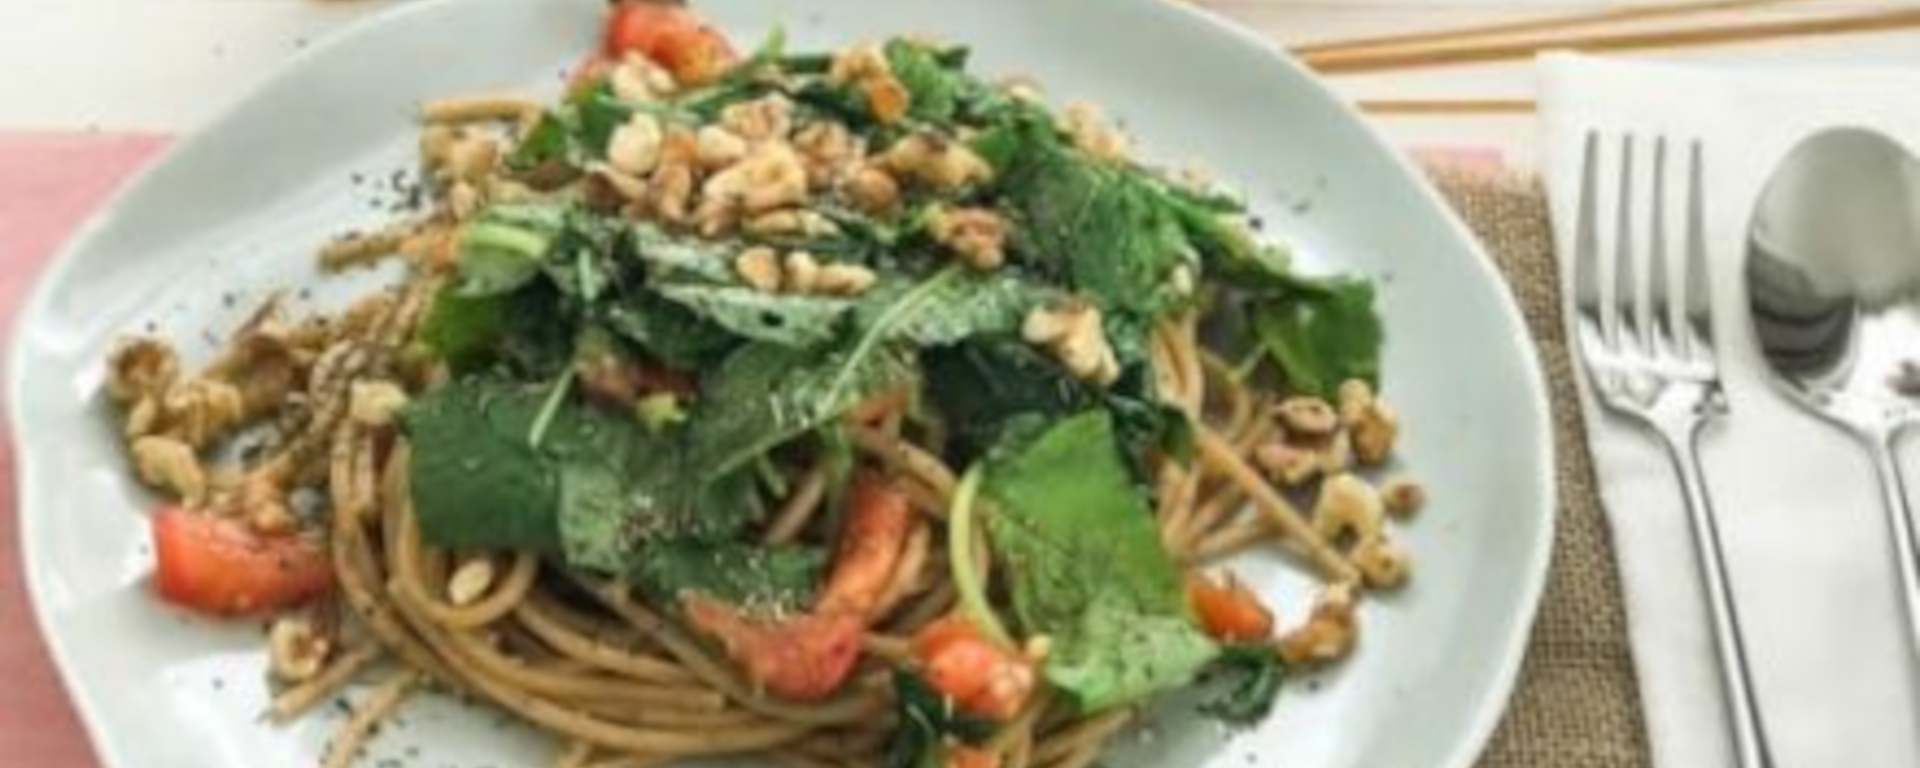 Noodles with Tomato, Spinach and Walnuts